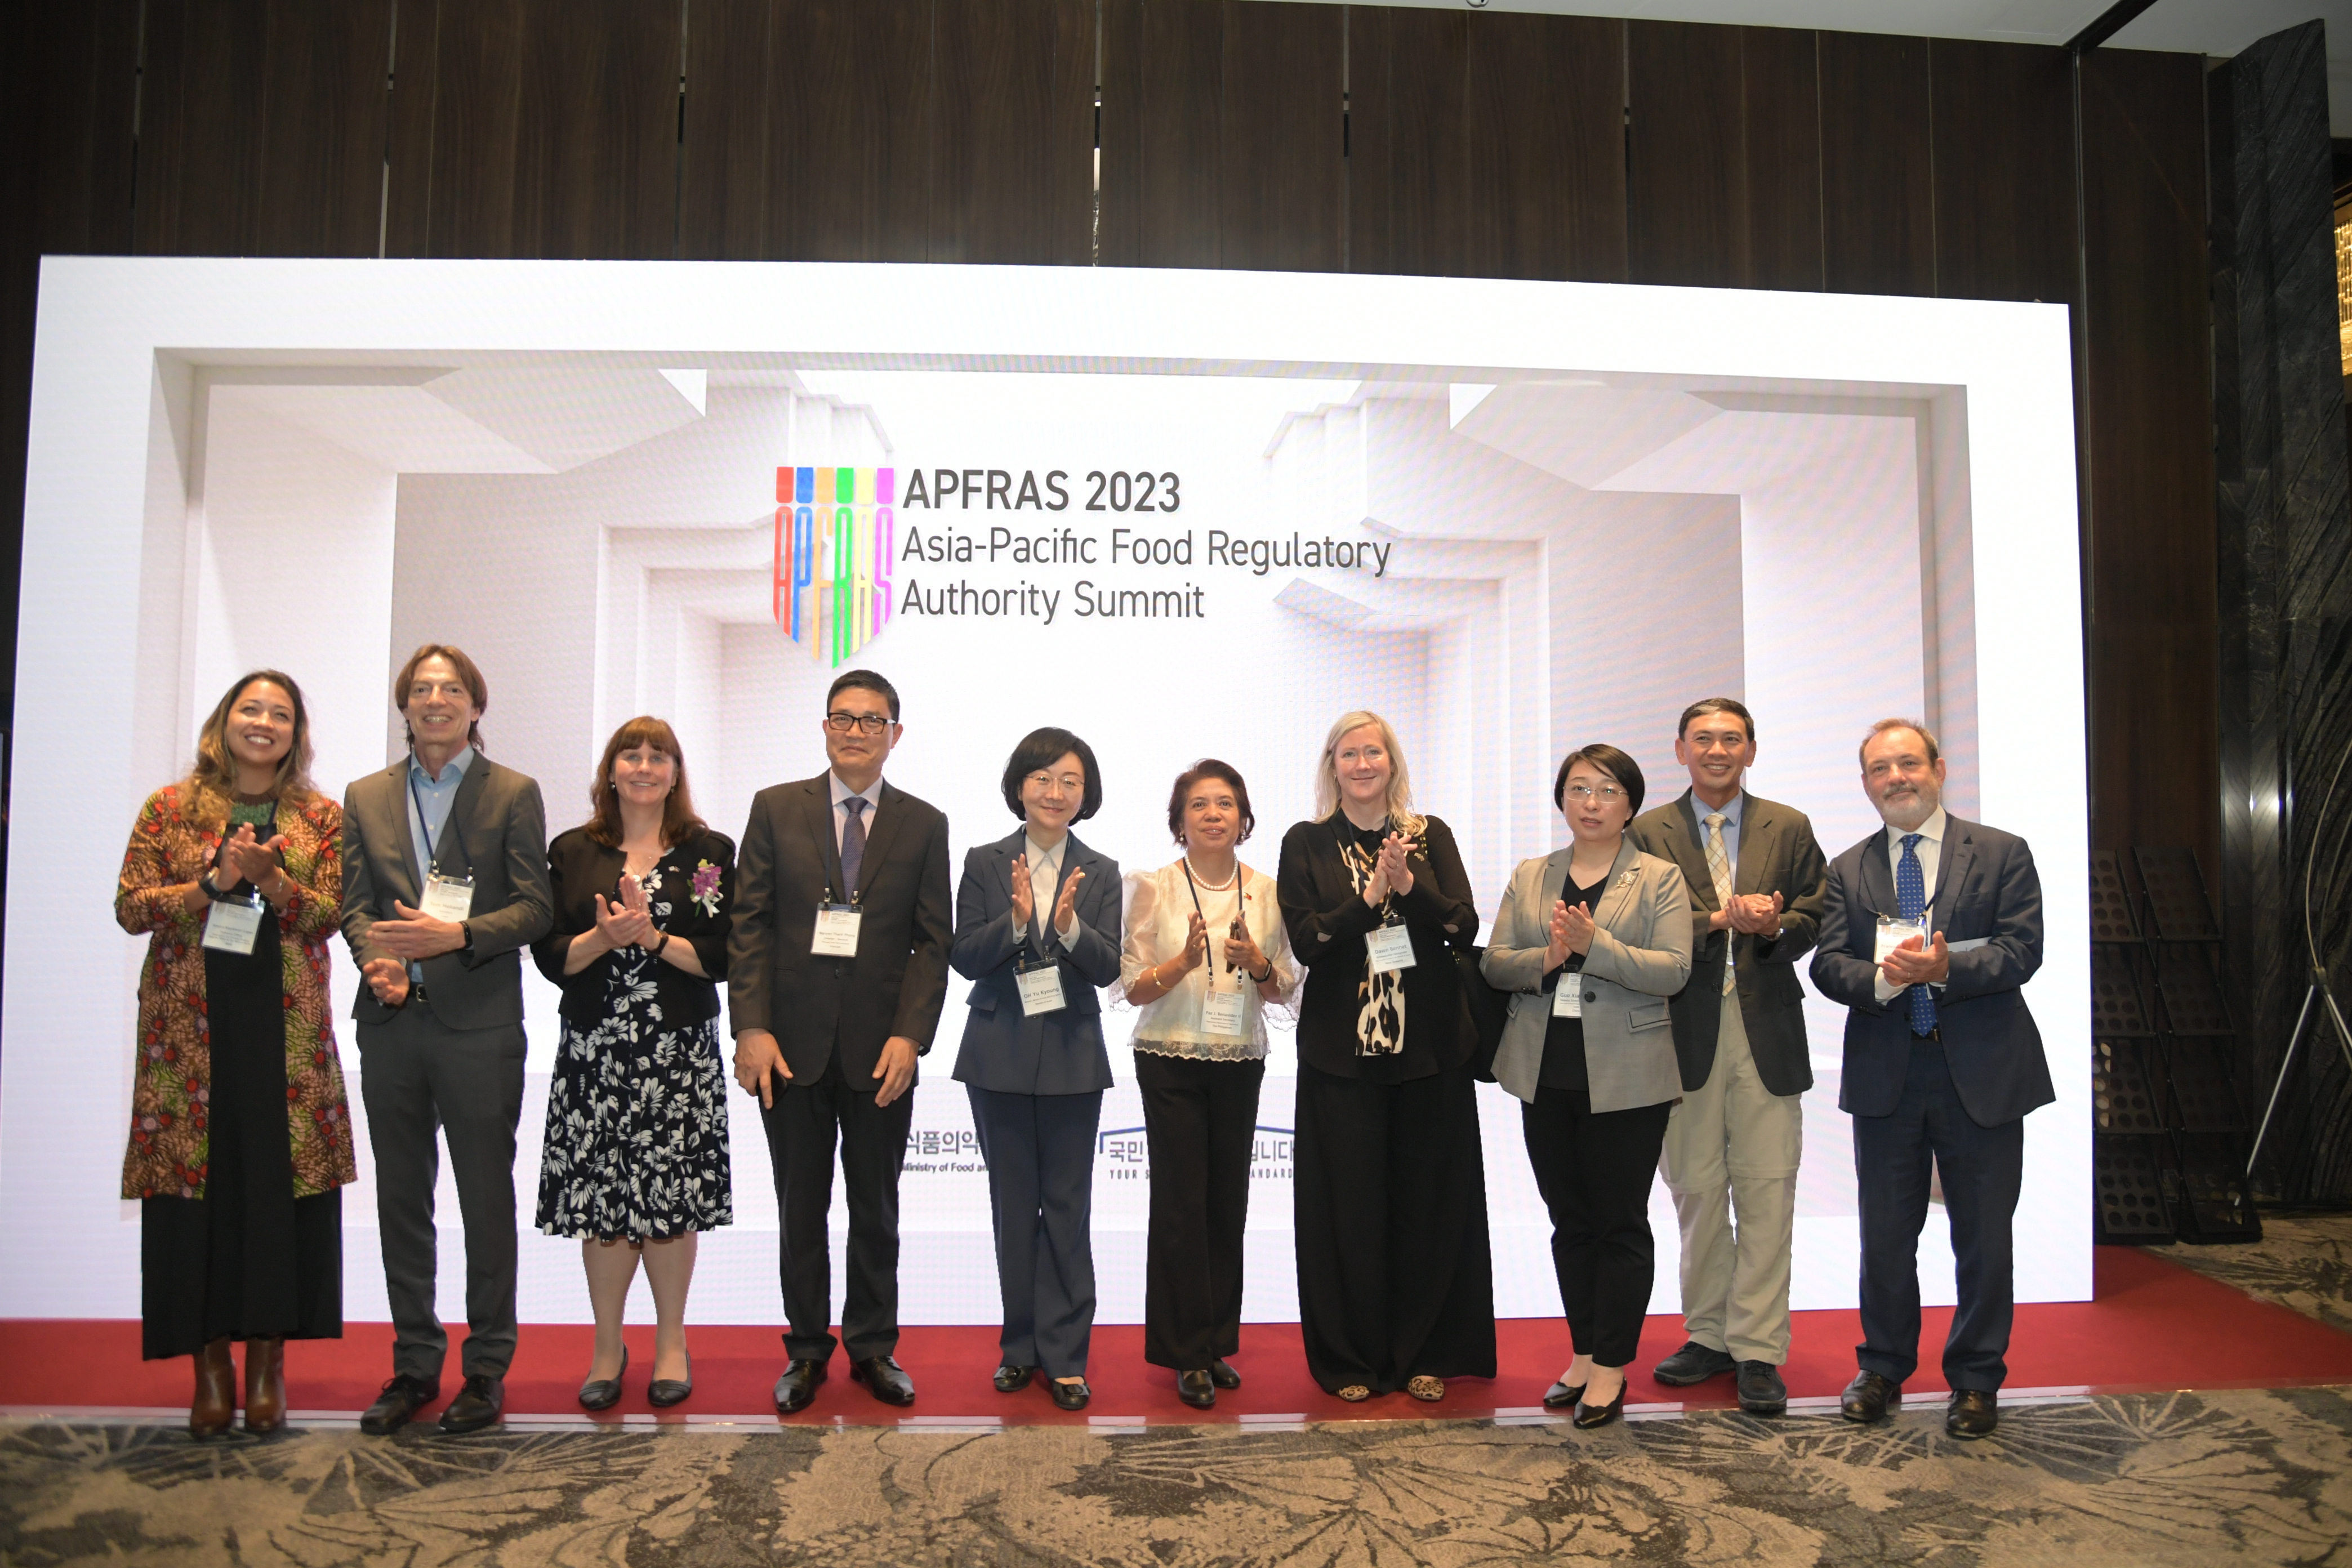 Photo News4 - [May 10, 2023] Minister Delivers Opening Speech at APFRAS 2023